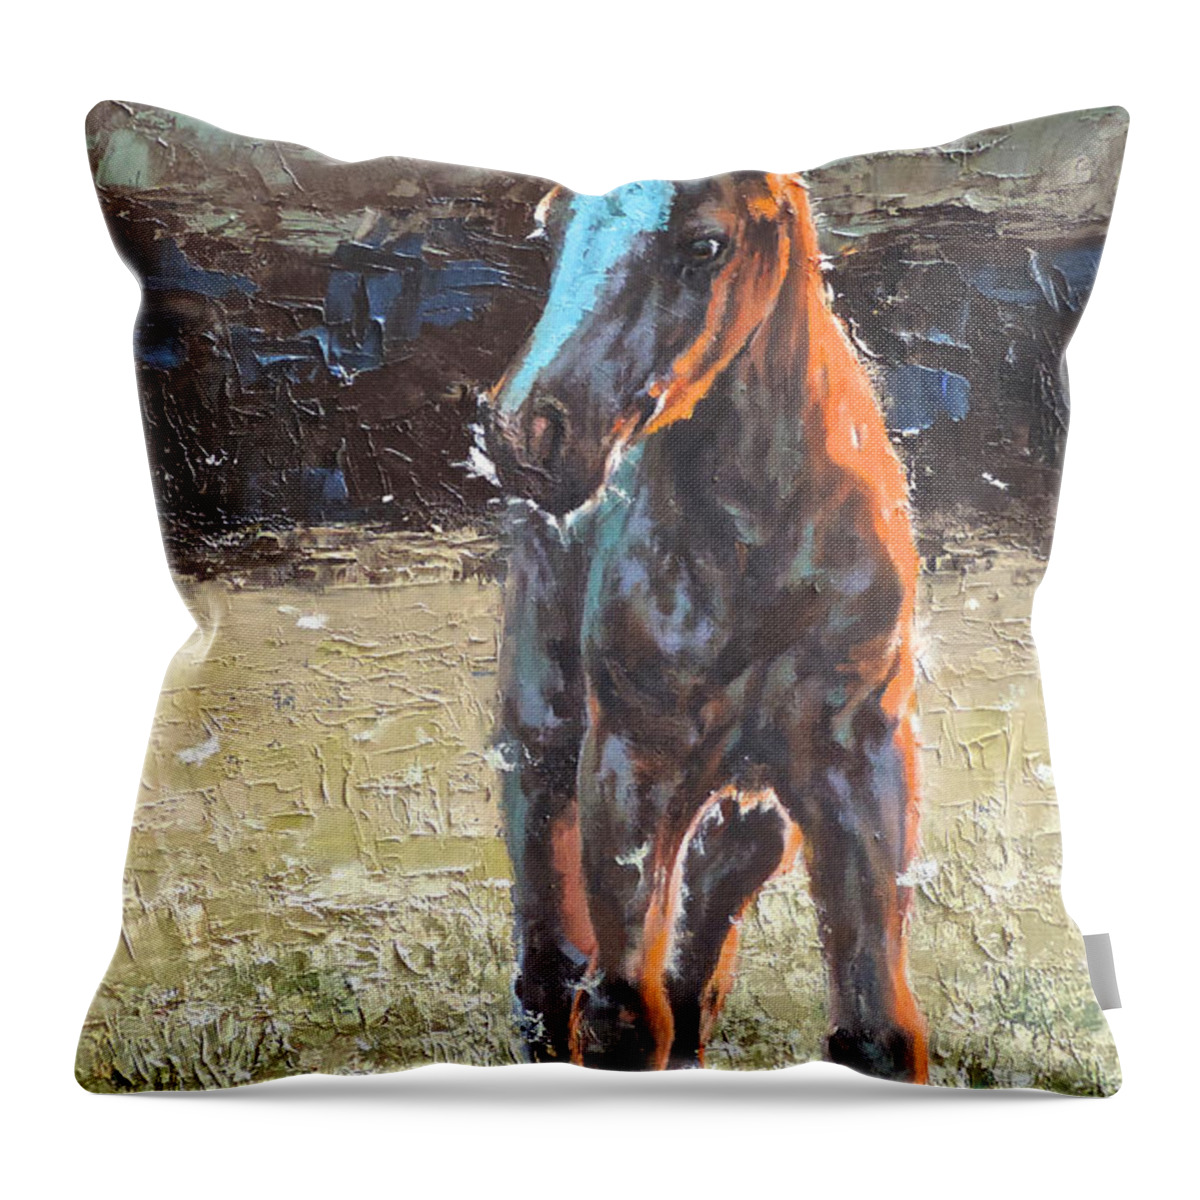 Colt Throw Pillow featuring the painting Dandelion Dream by Mia DeLode